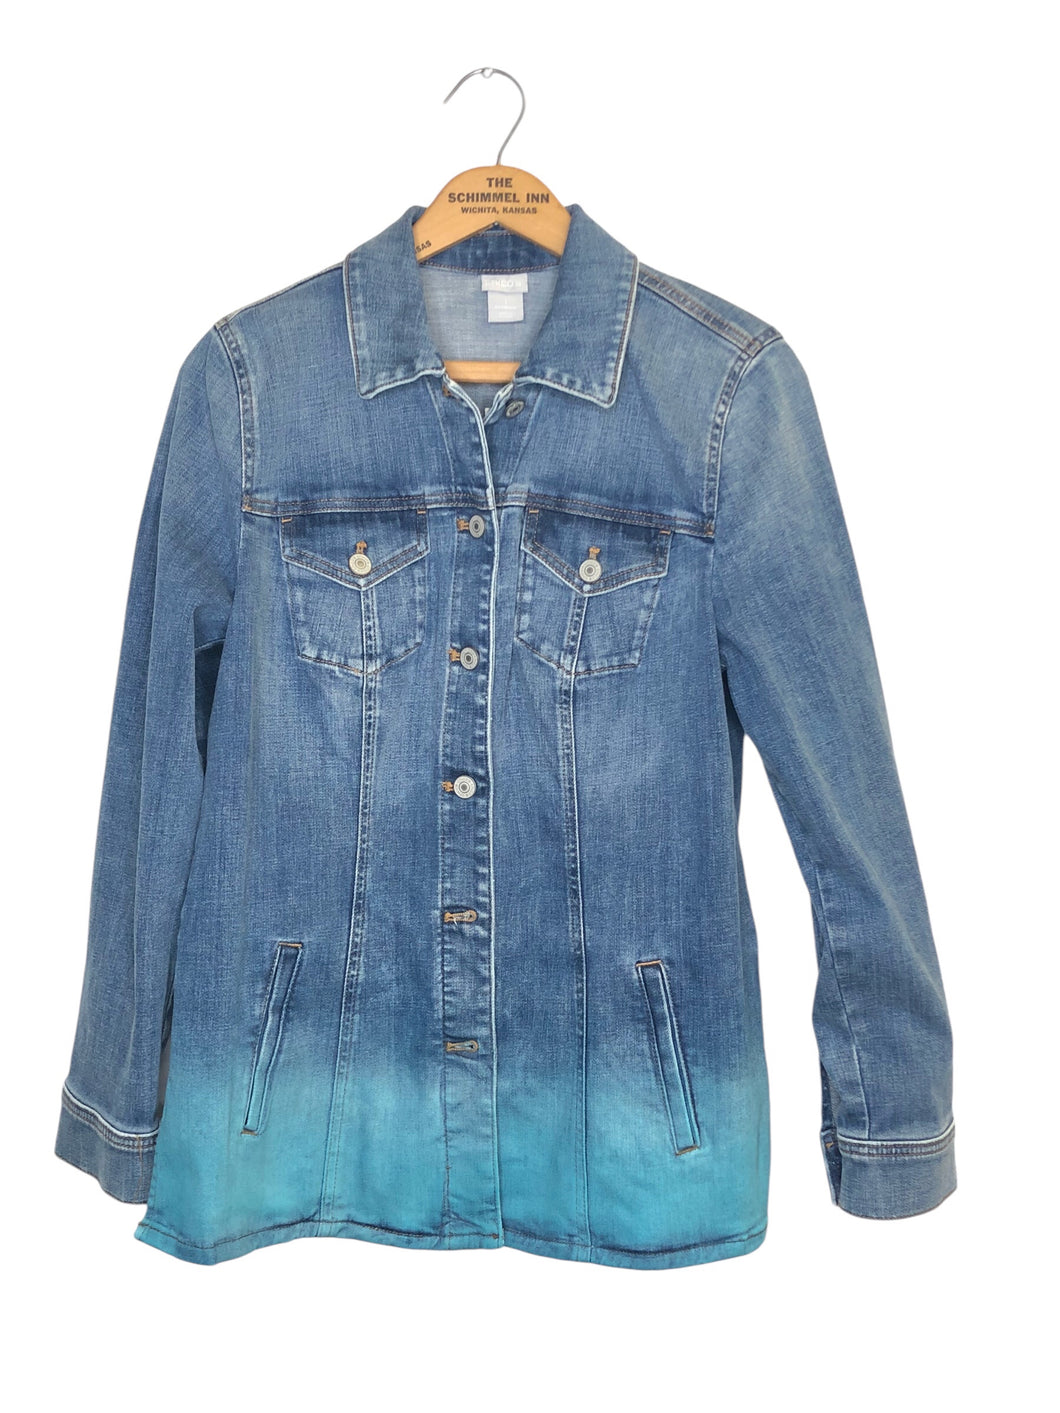 Size Medium  Blue New With Tags!! Denim Teal ombre Jacket